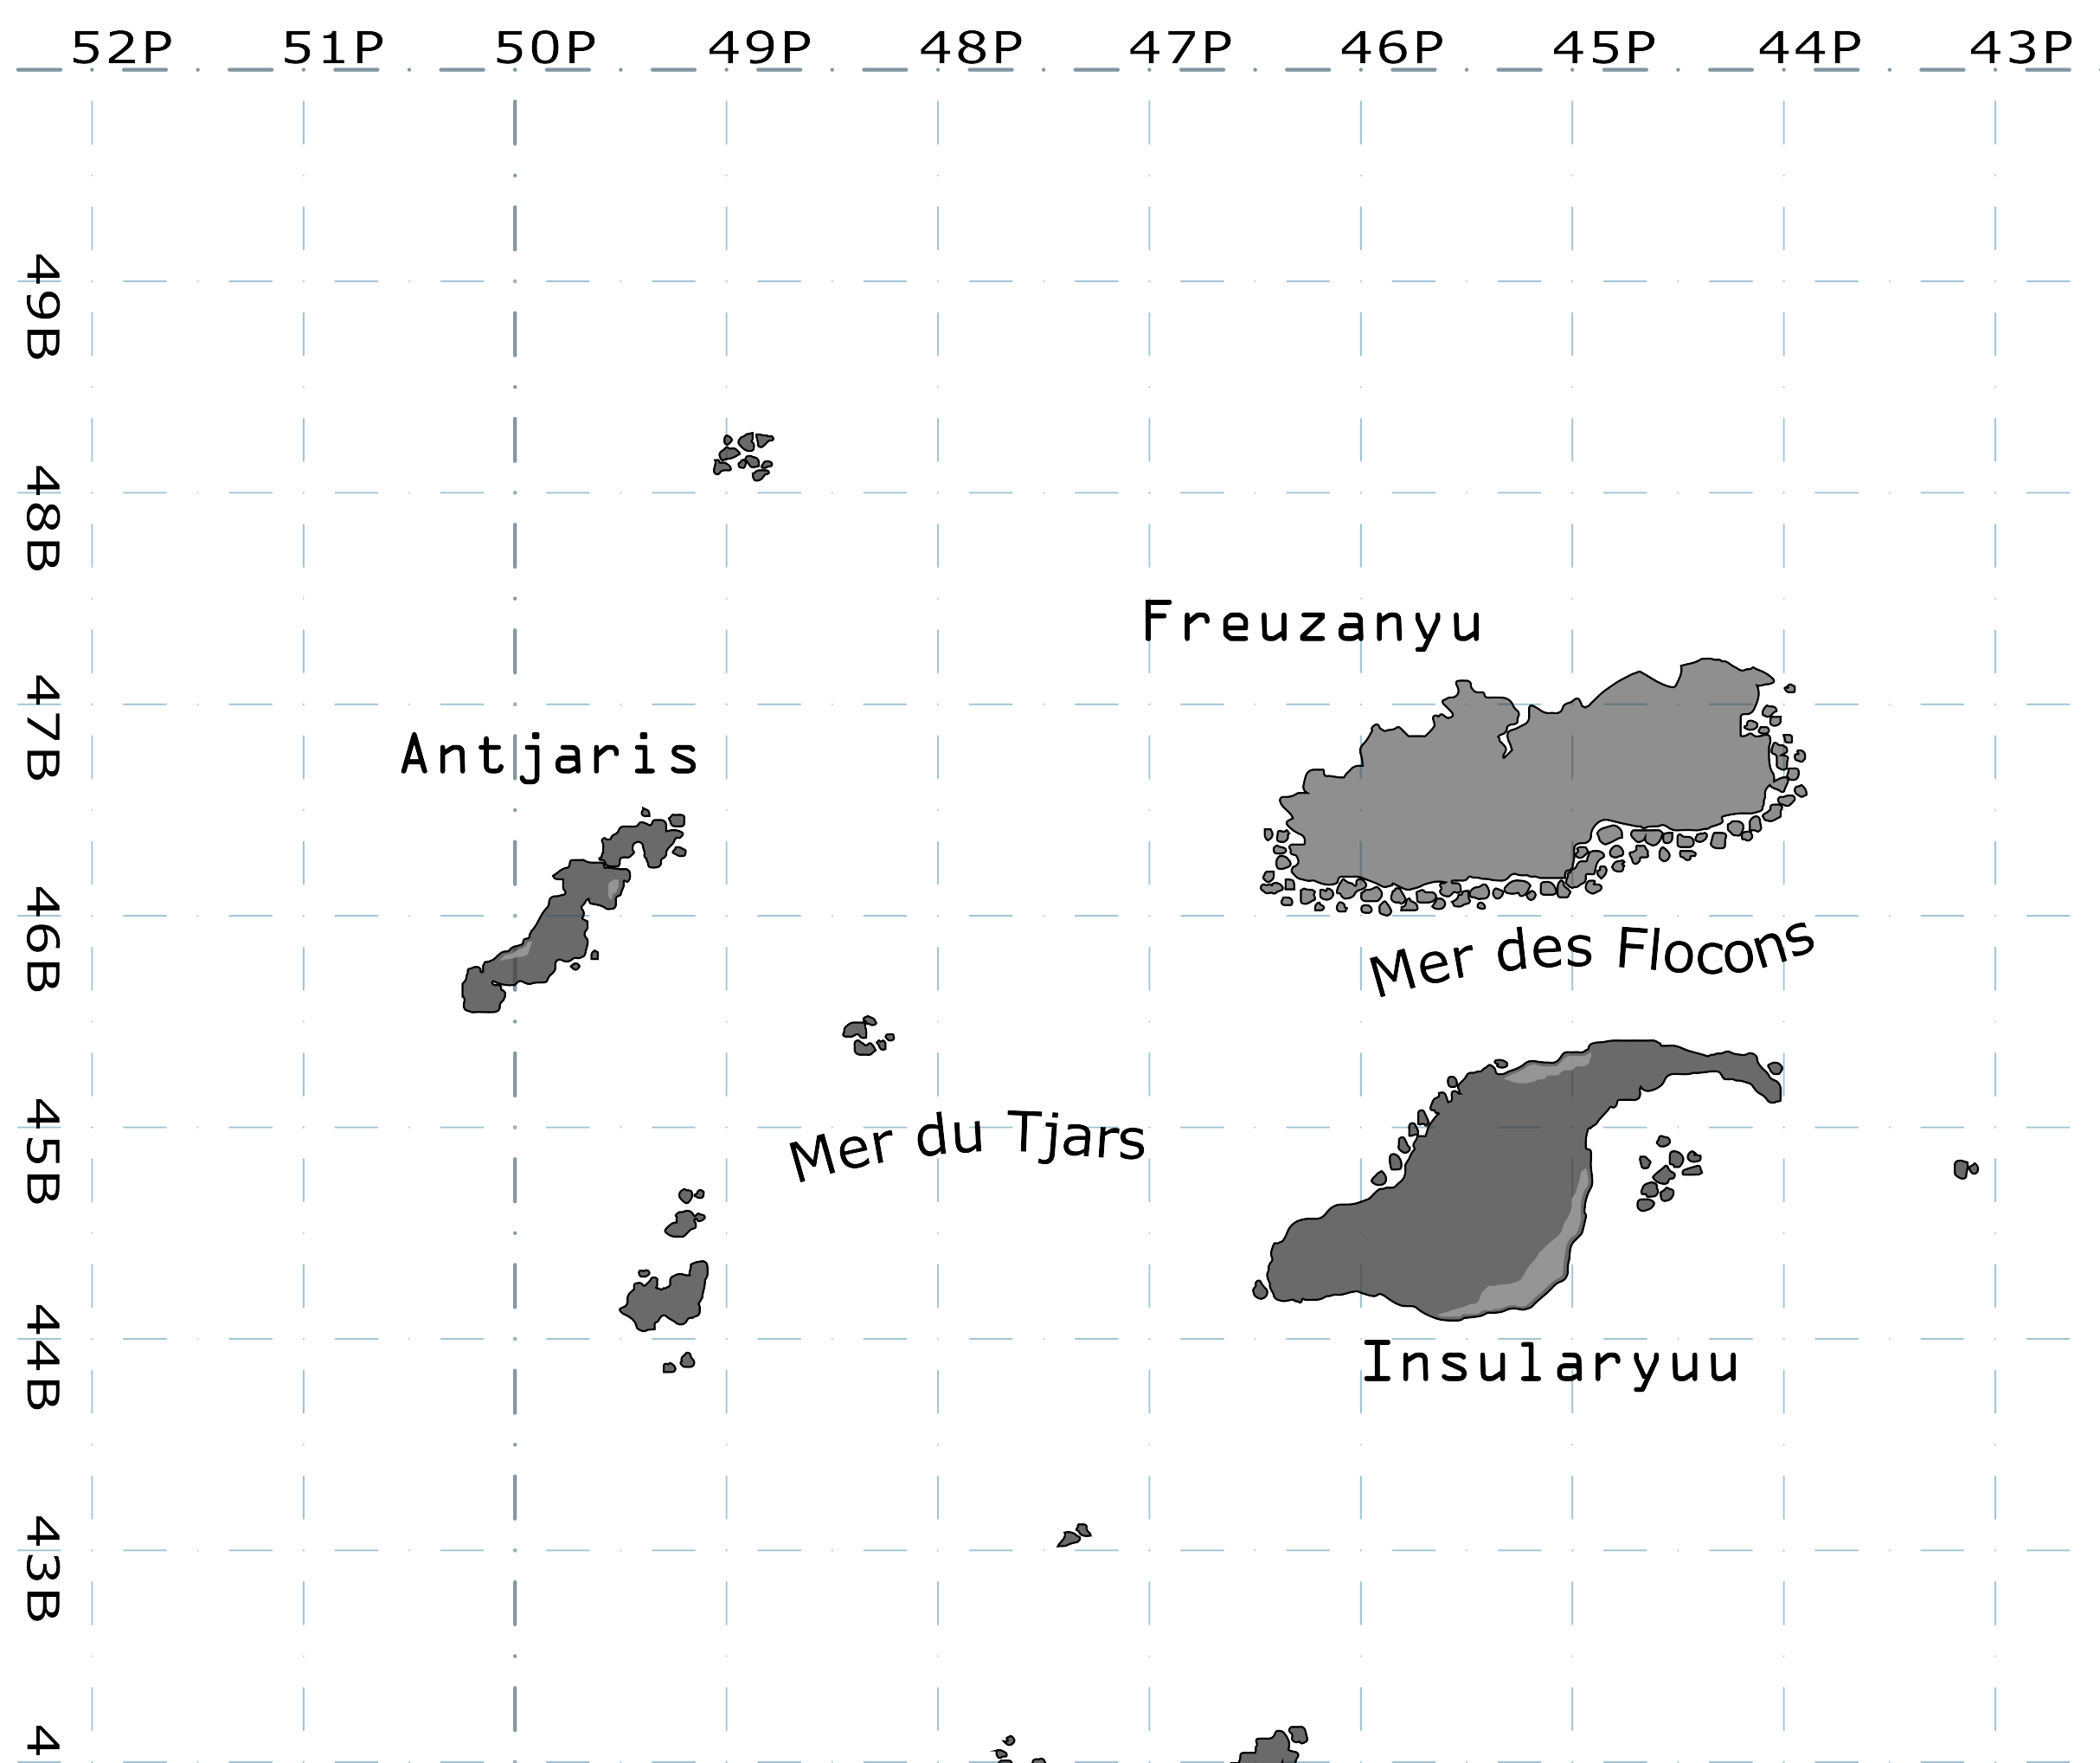 Position of the island